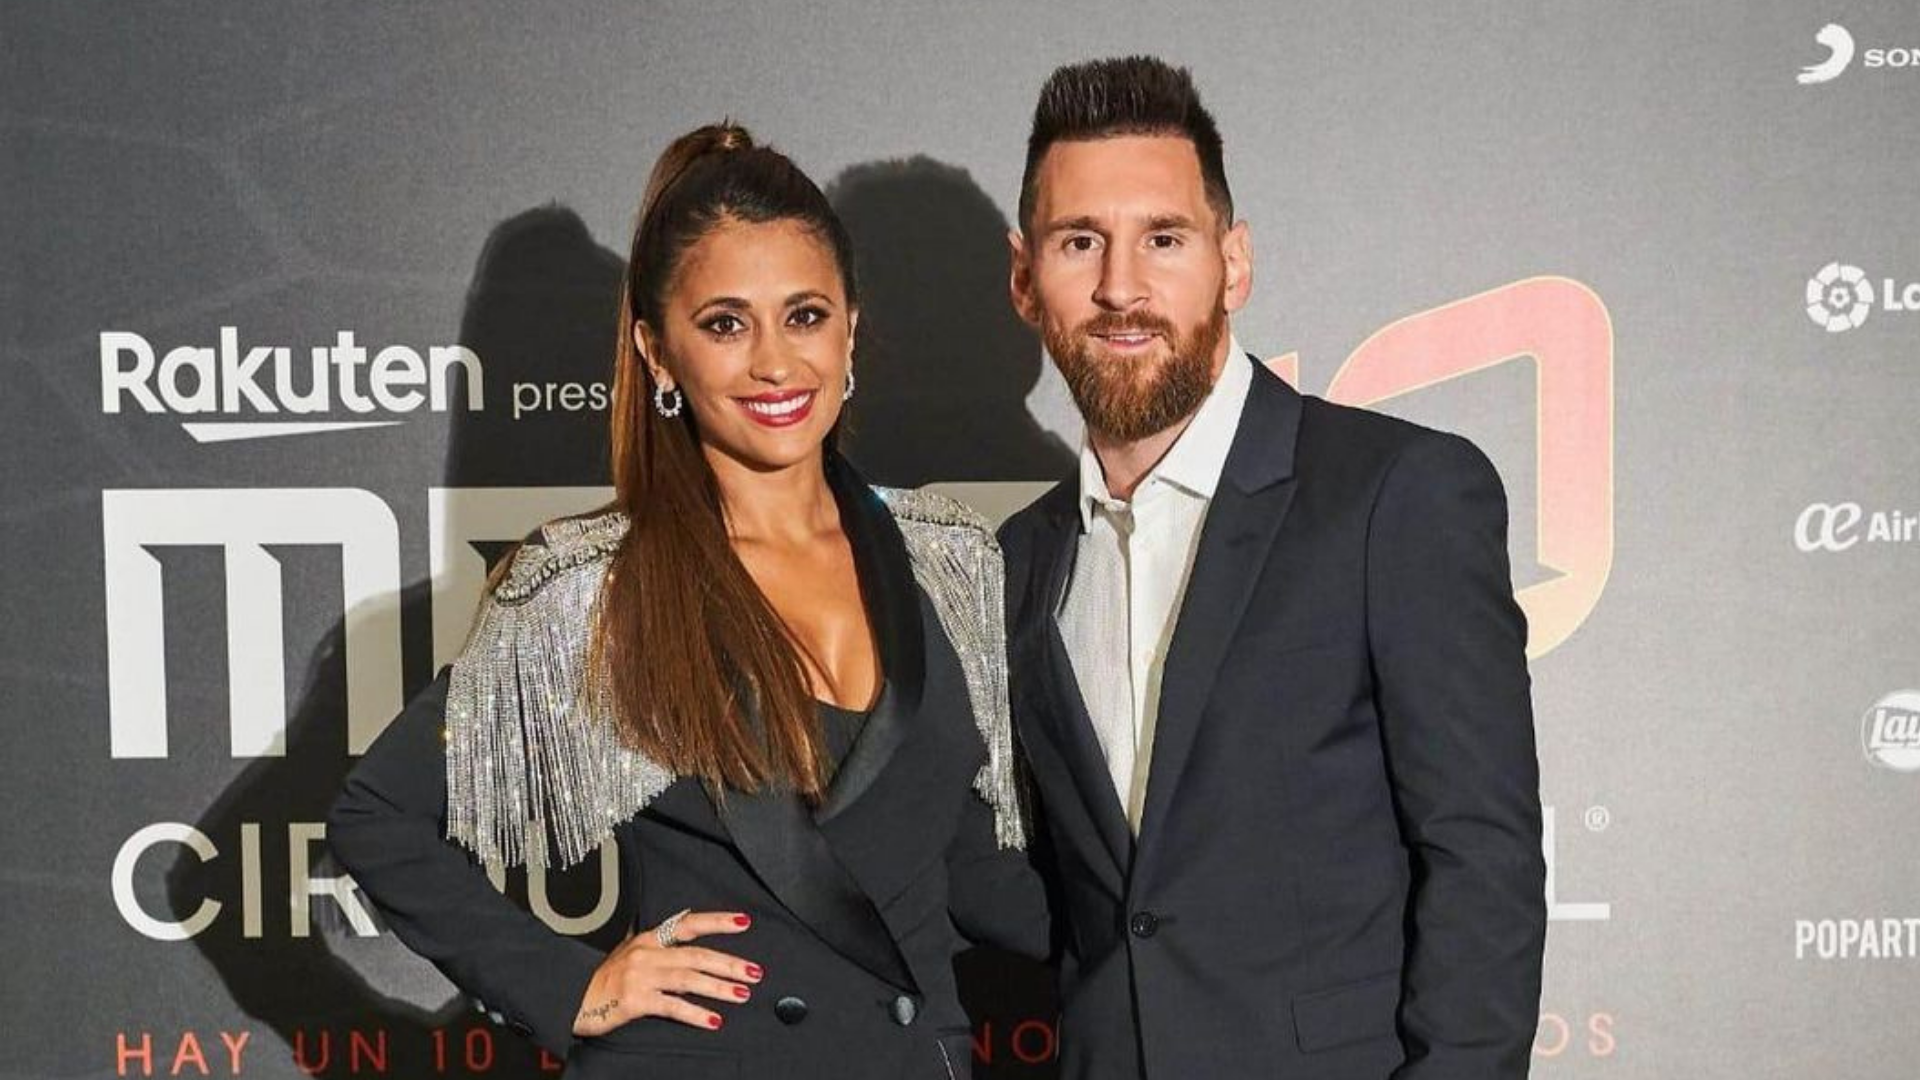 Lionel Messi And Wife Antonela Roccuzzo Stun On Ibiza Holiday With Luis ...